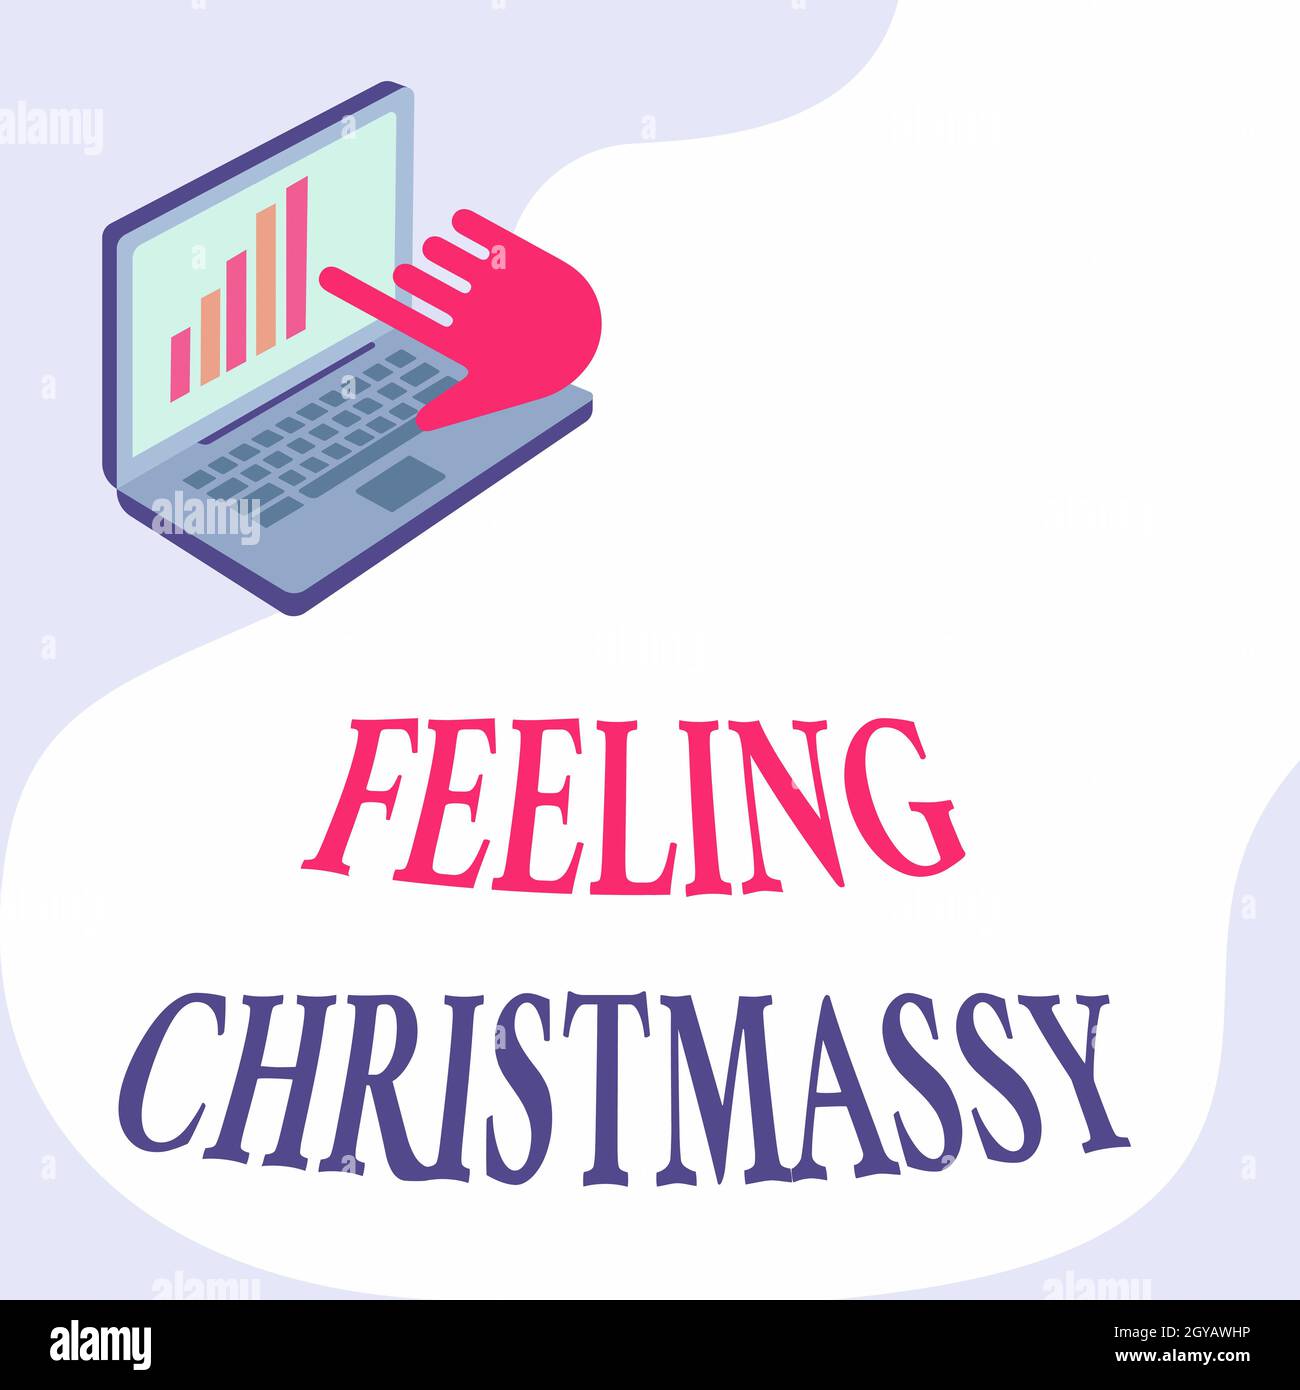 Text sign showing Feeling Christmassy, Concept meaning Resembling or having feelings of Christmas festivity Laptop Drawing Showing Graph Growth Hand P Stock Photo